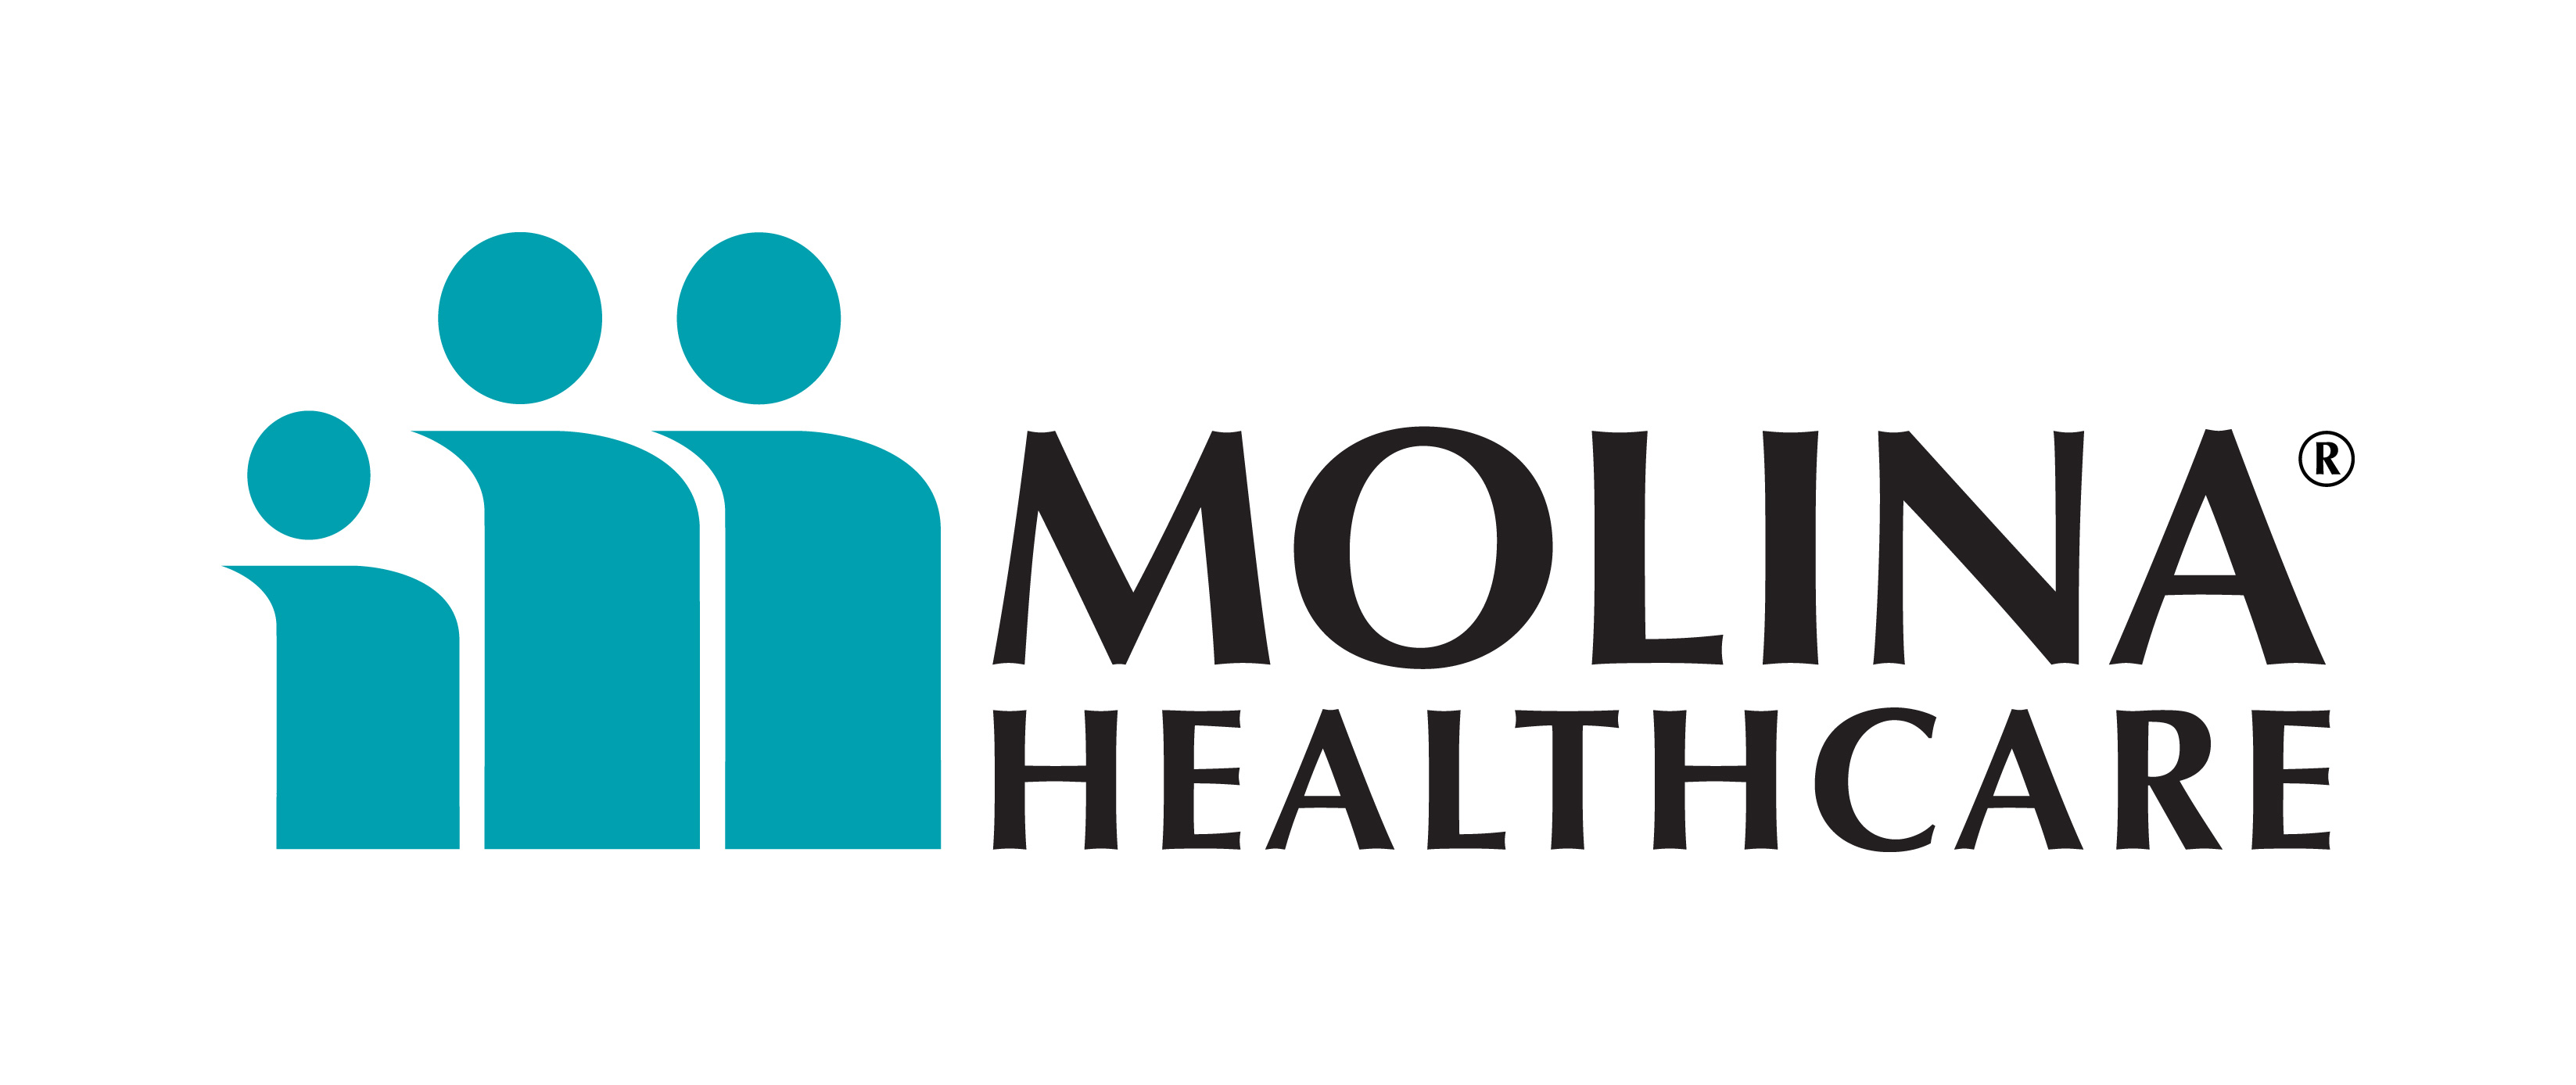 Molina Healthcare logo, teal with black text